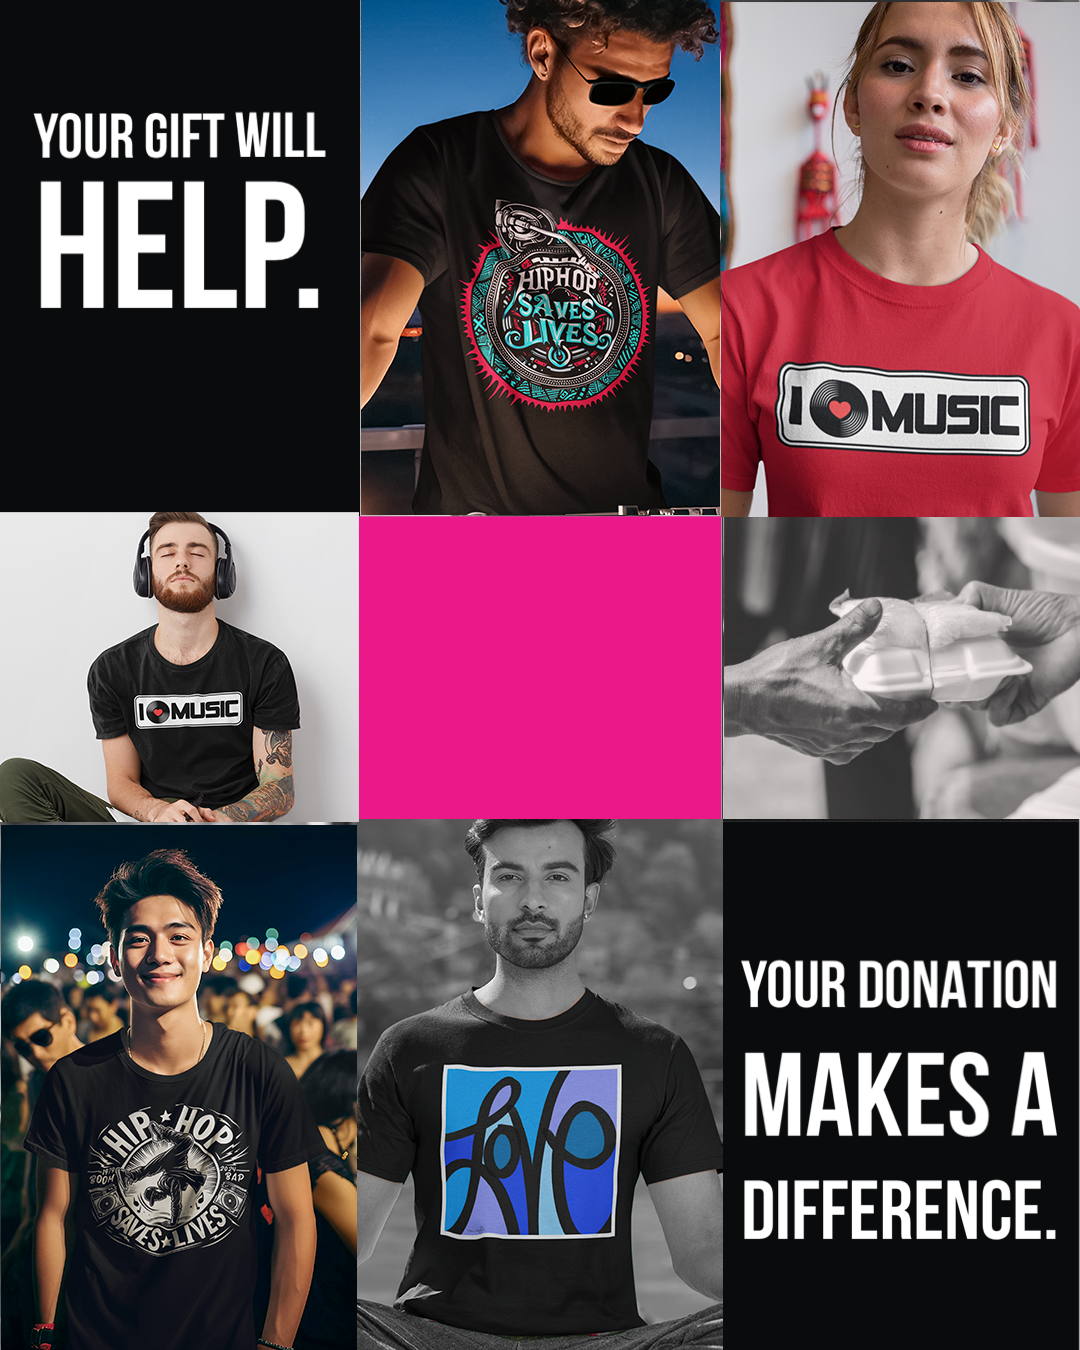 Beats 4 Hope brings people and music together for social good